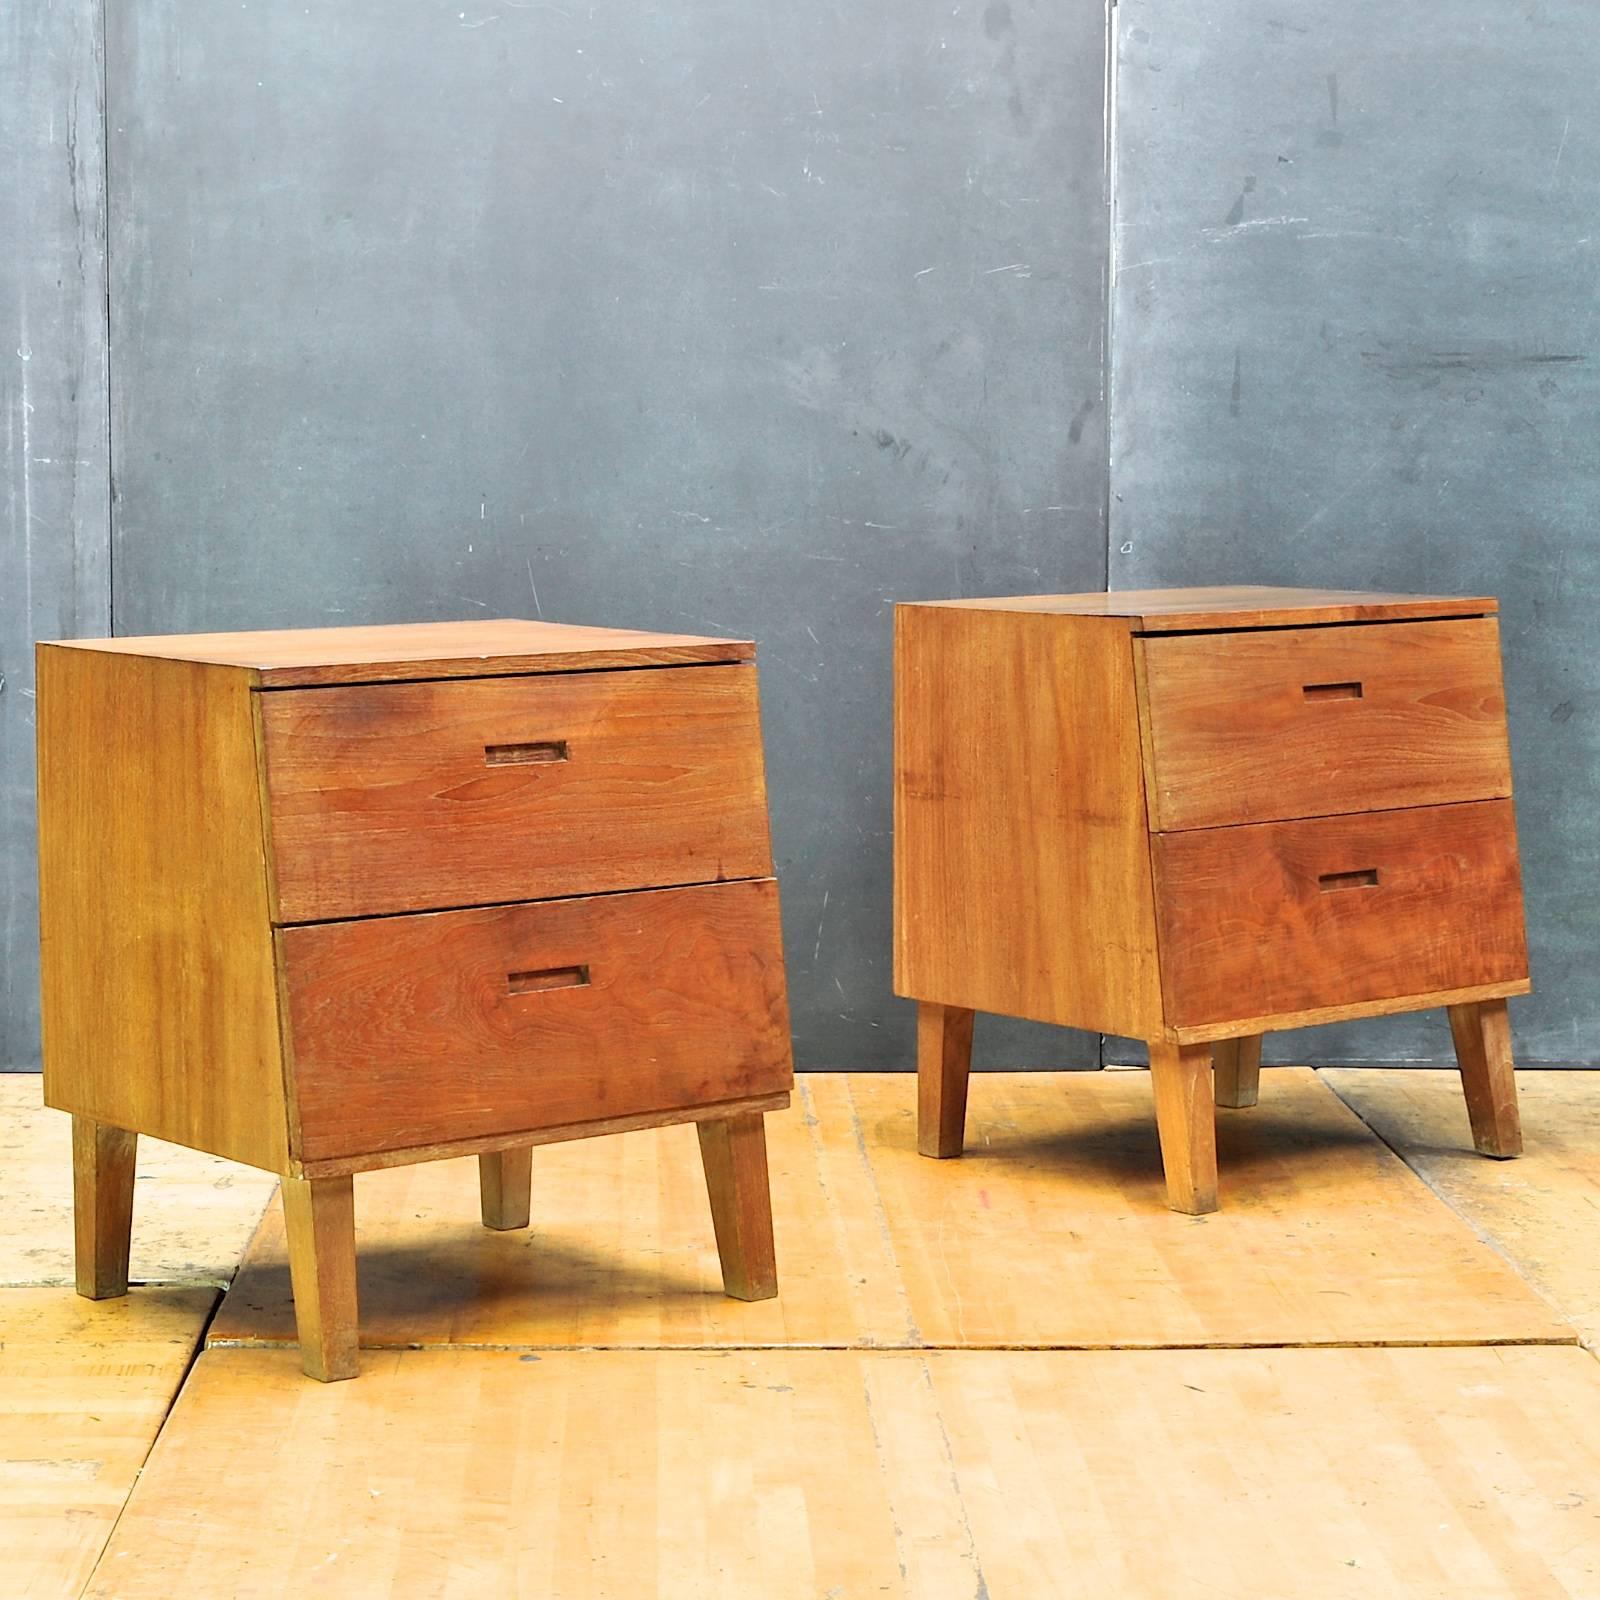 USA, circa 1950s. Unknown modernist craftsman, slanted face solid walnut dresser. Handmade. Very old growth, deep hued, complex grained hardwood. Excellent construction, smooth and fully Functional. (Two matching bedside cabinets/double drawer